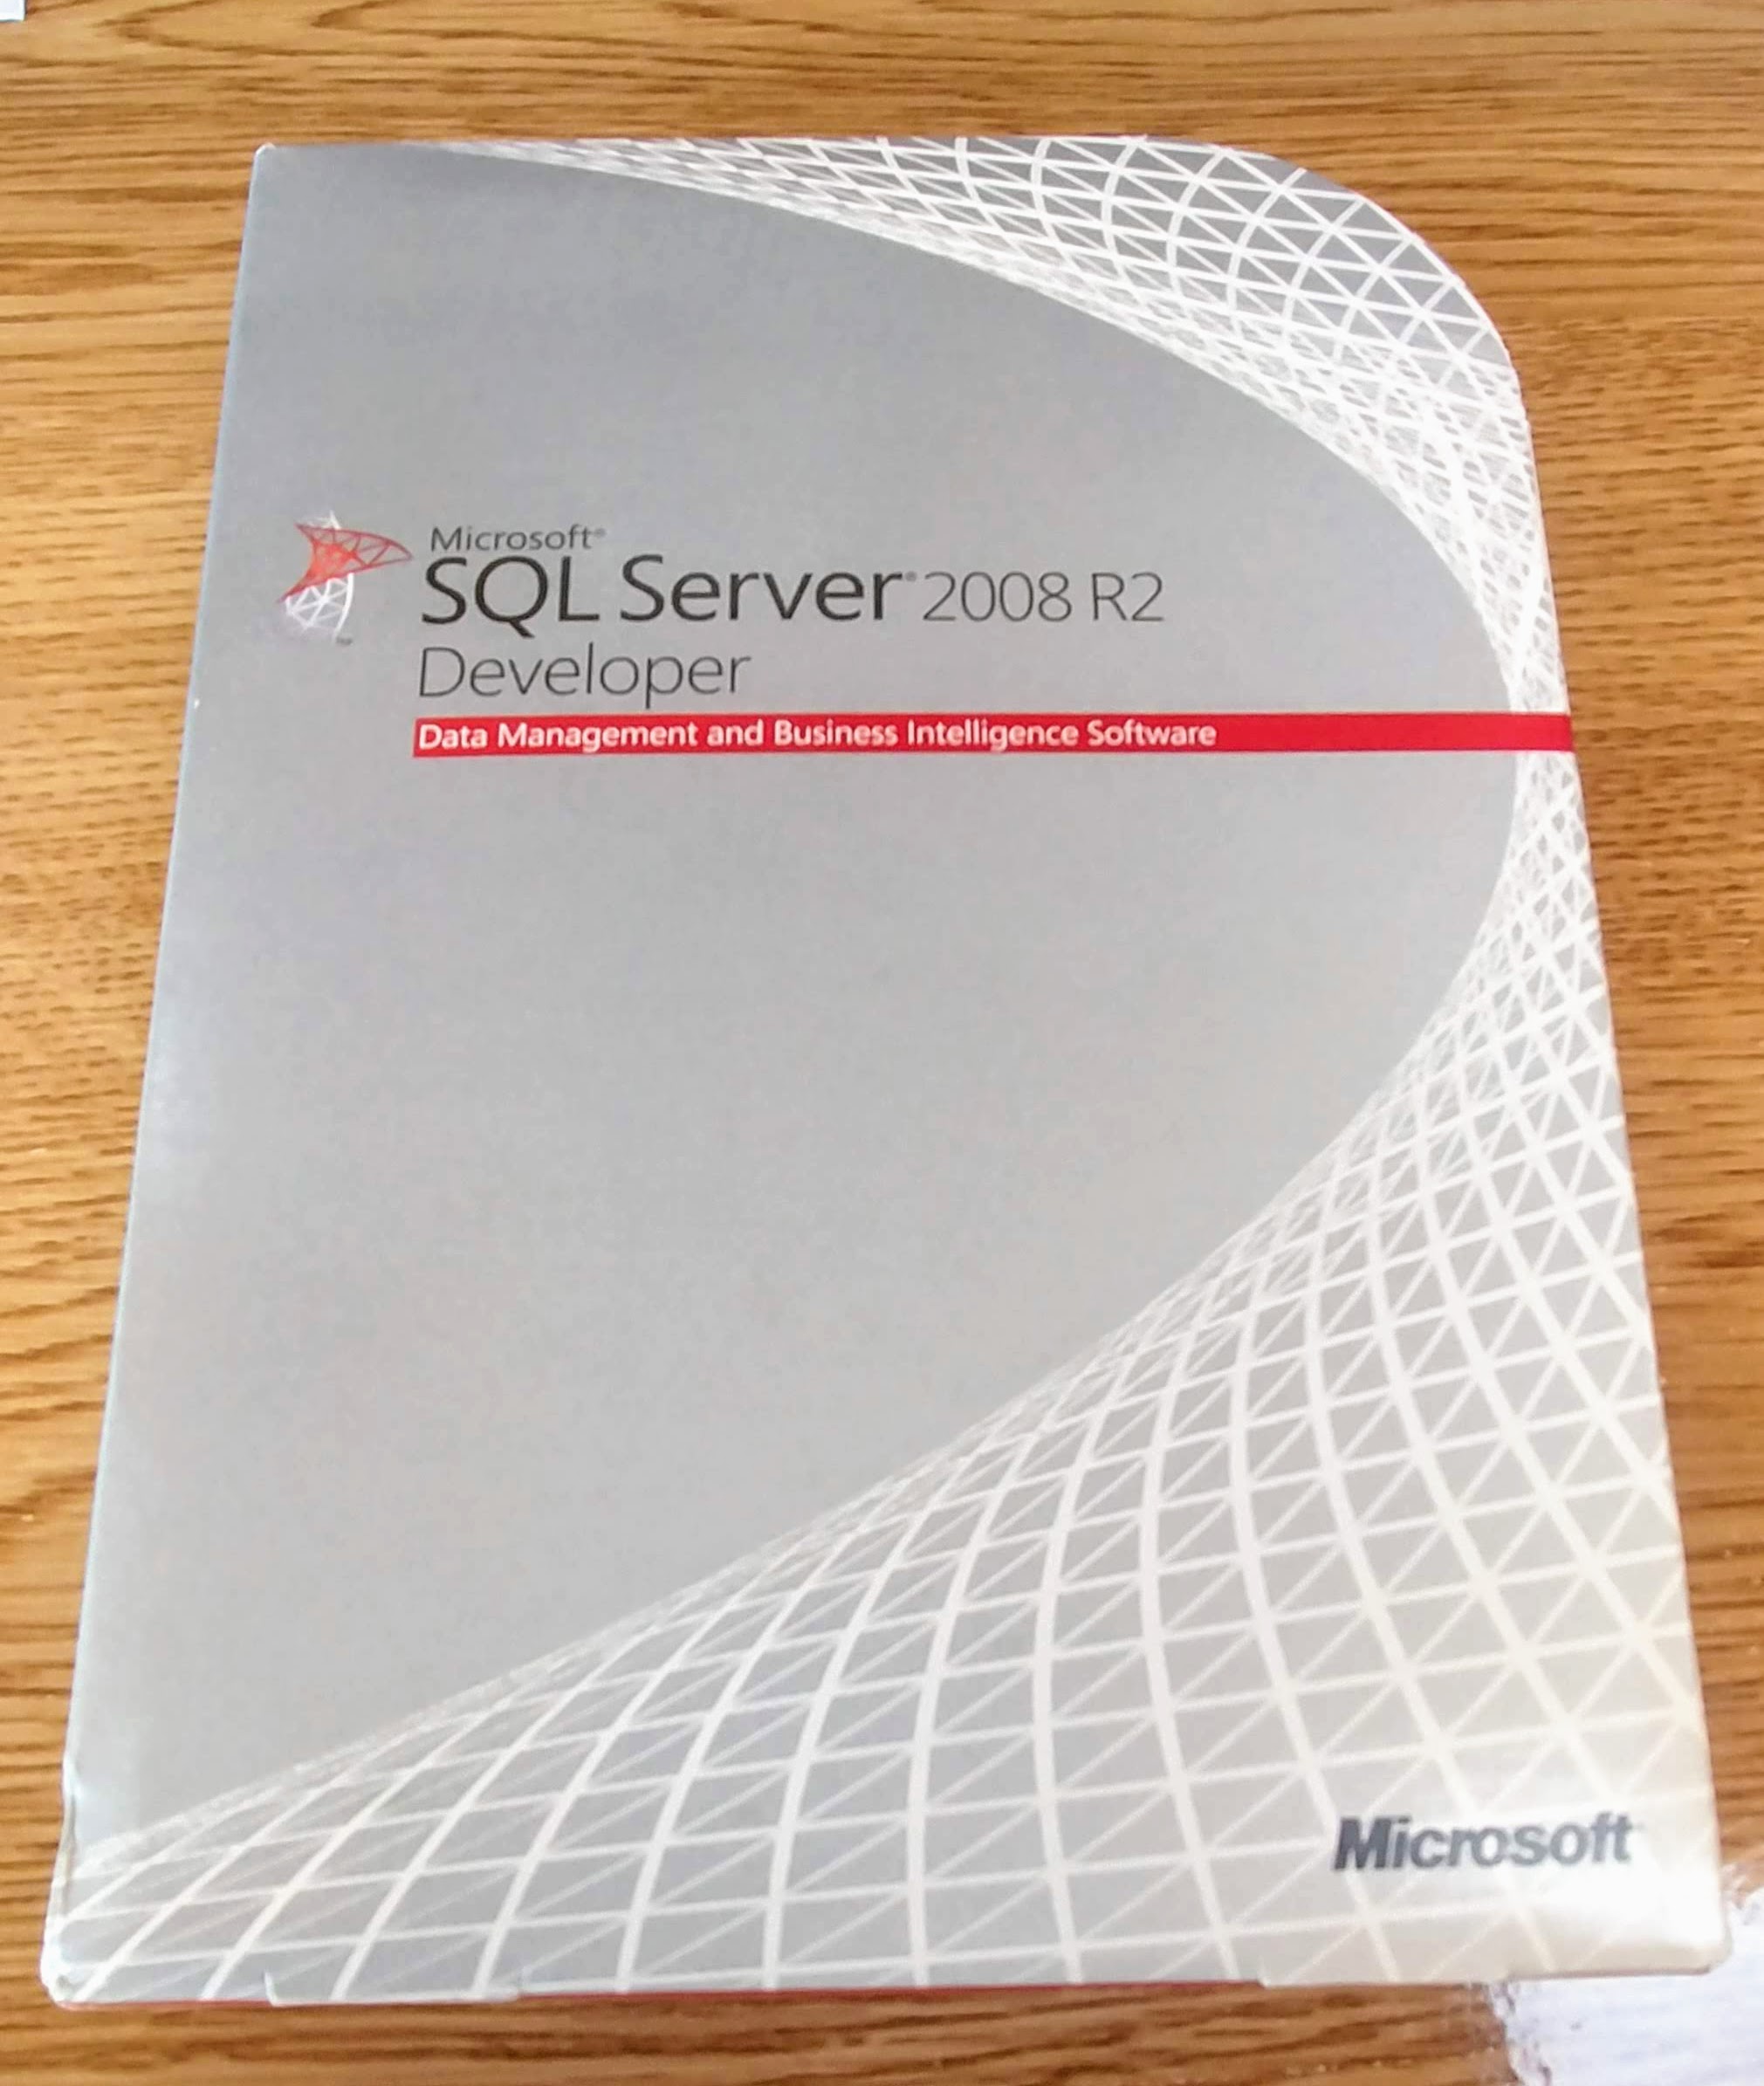 What Version of SQL Server Are You Using?